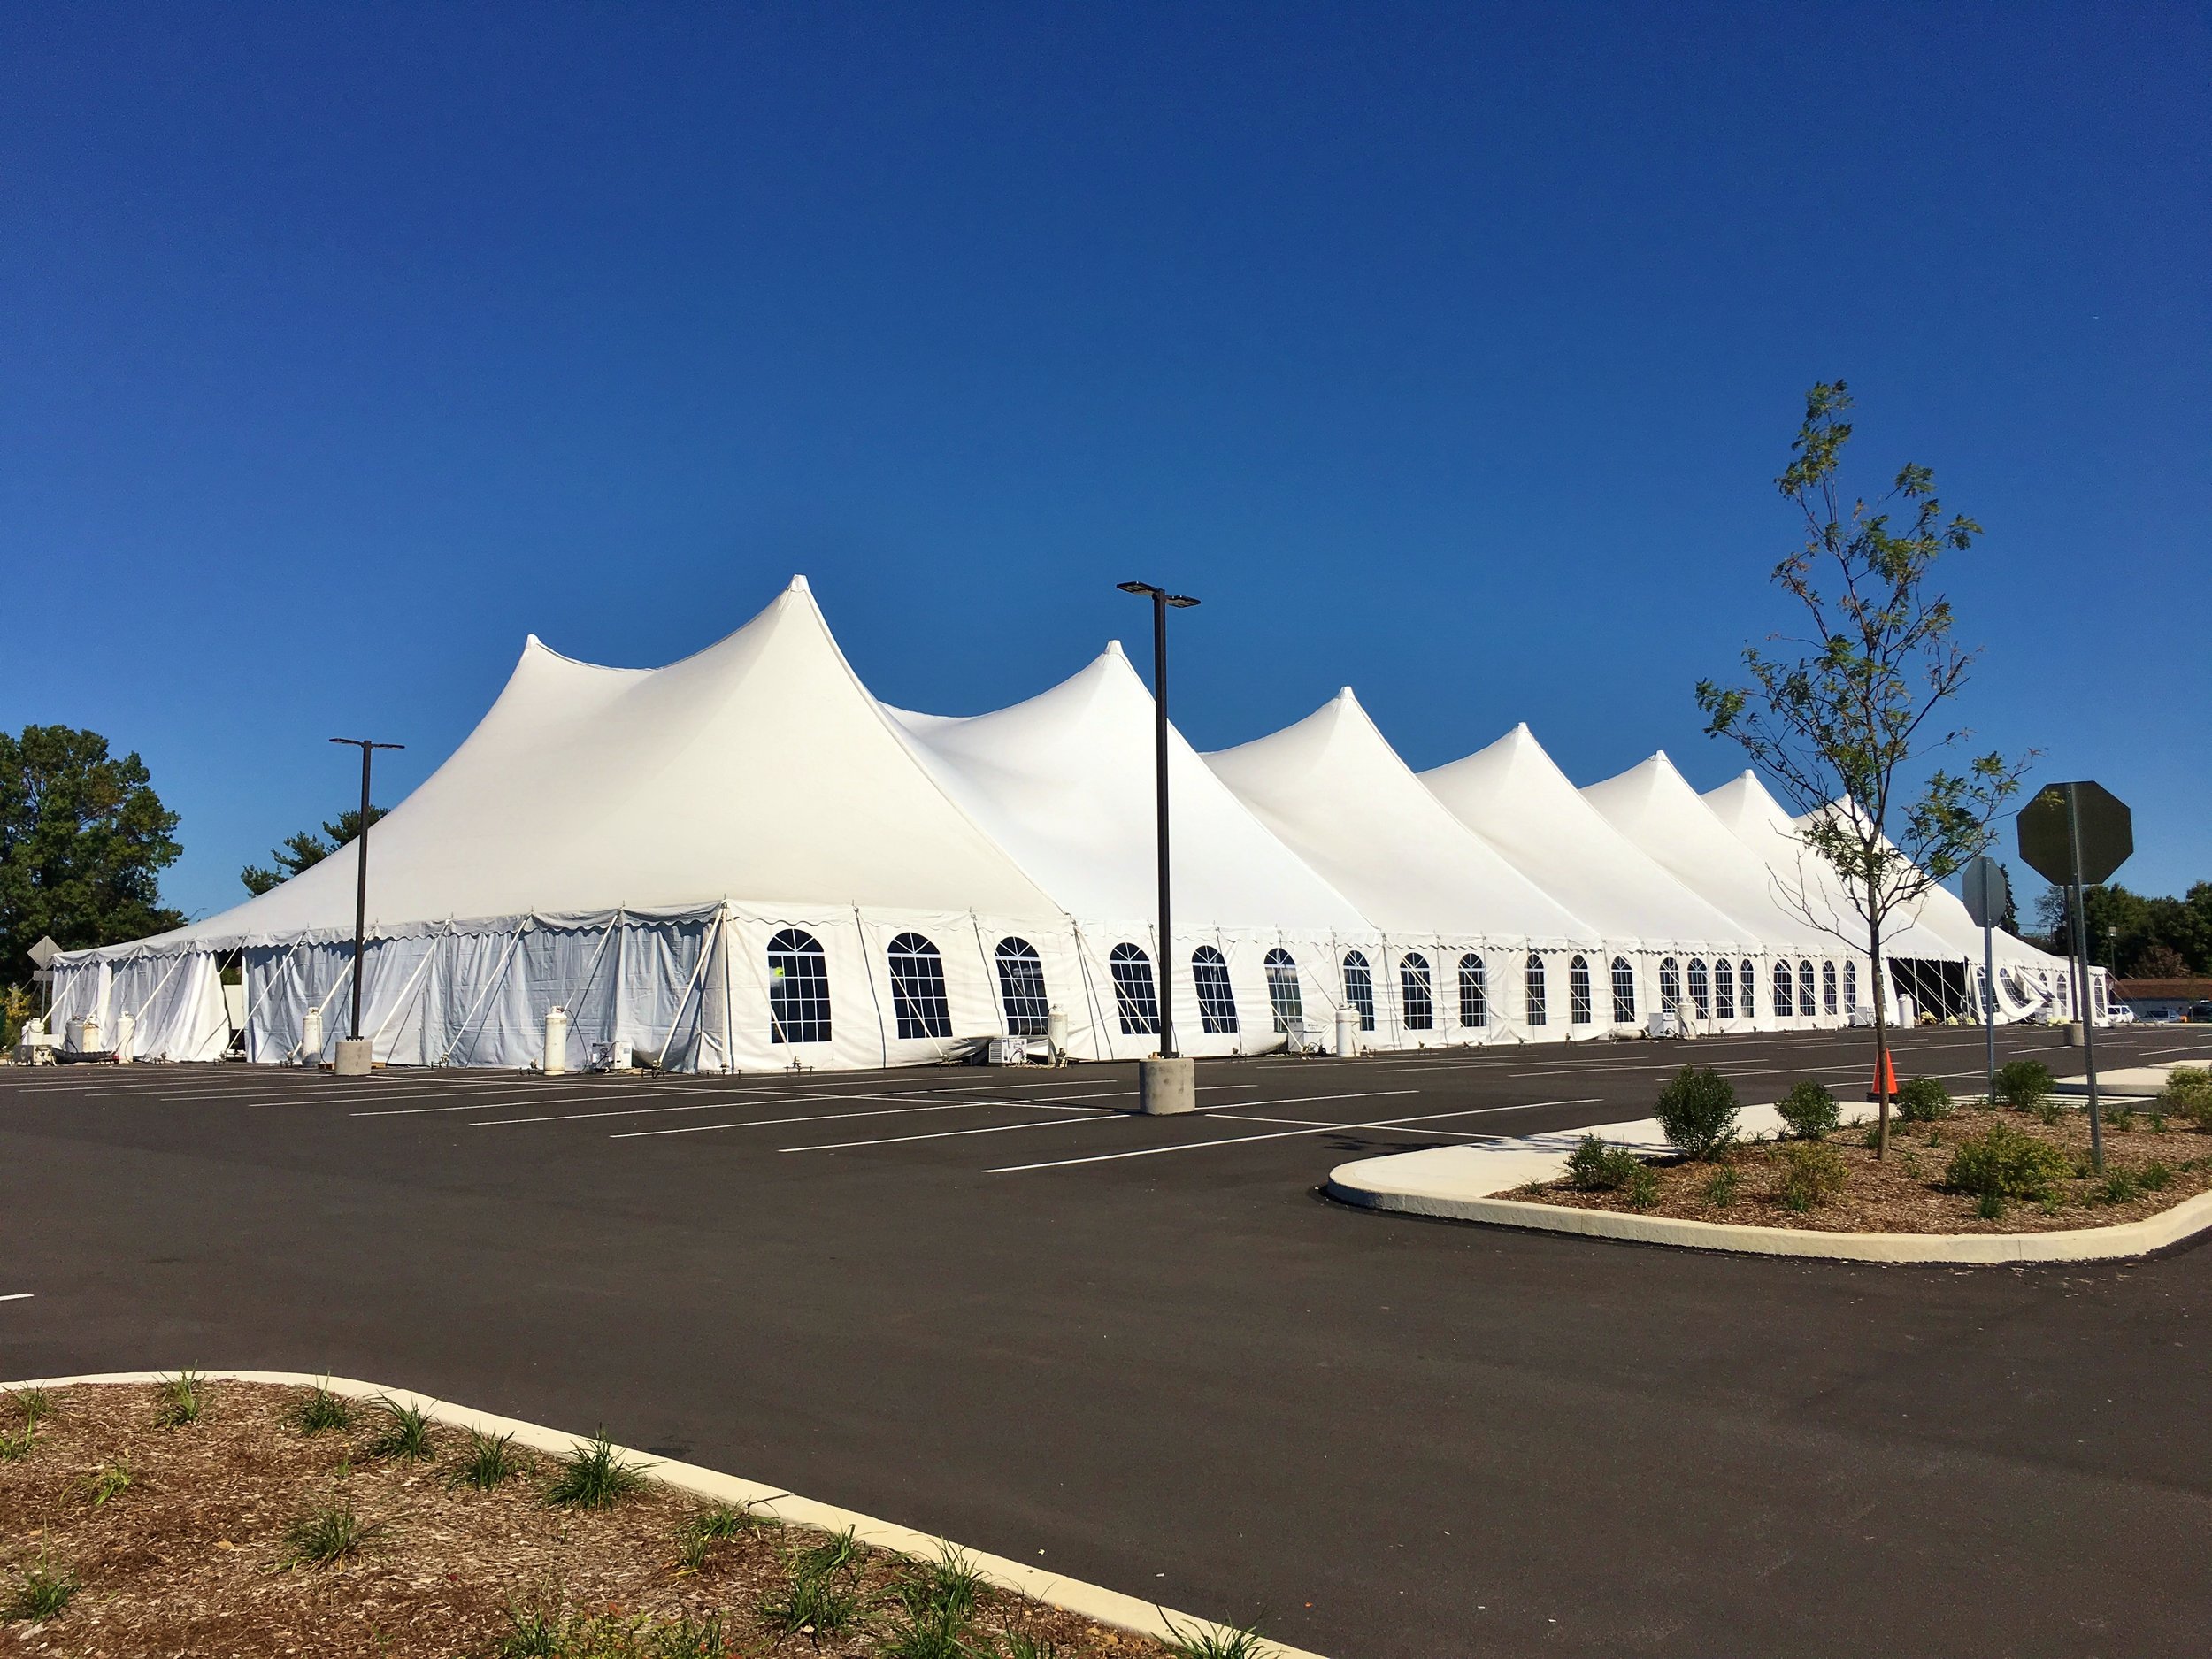 Large disaster response tents for sleeping or dining